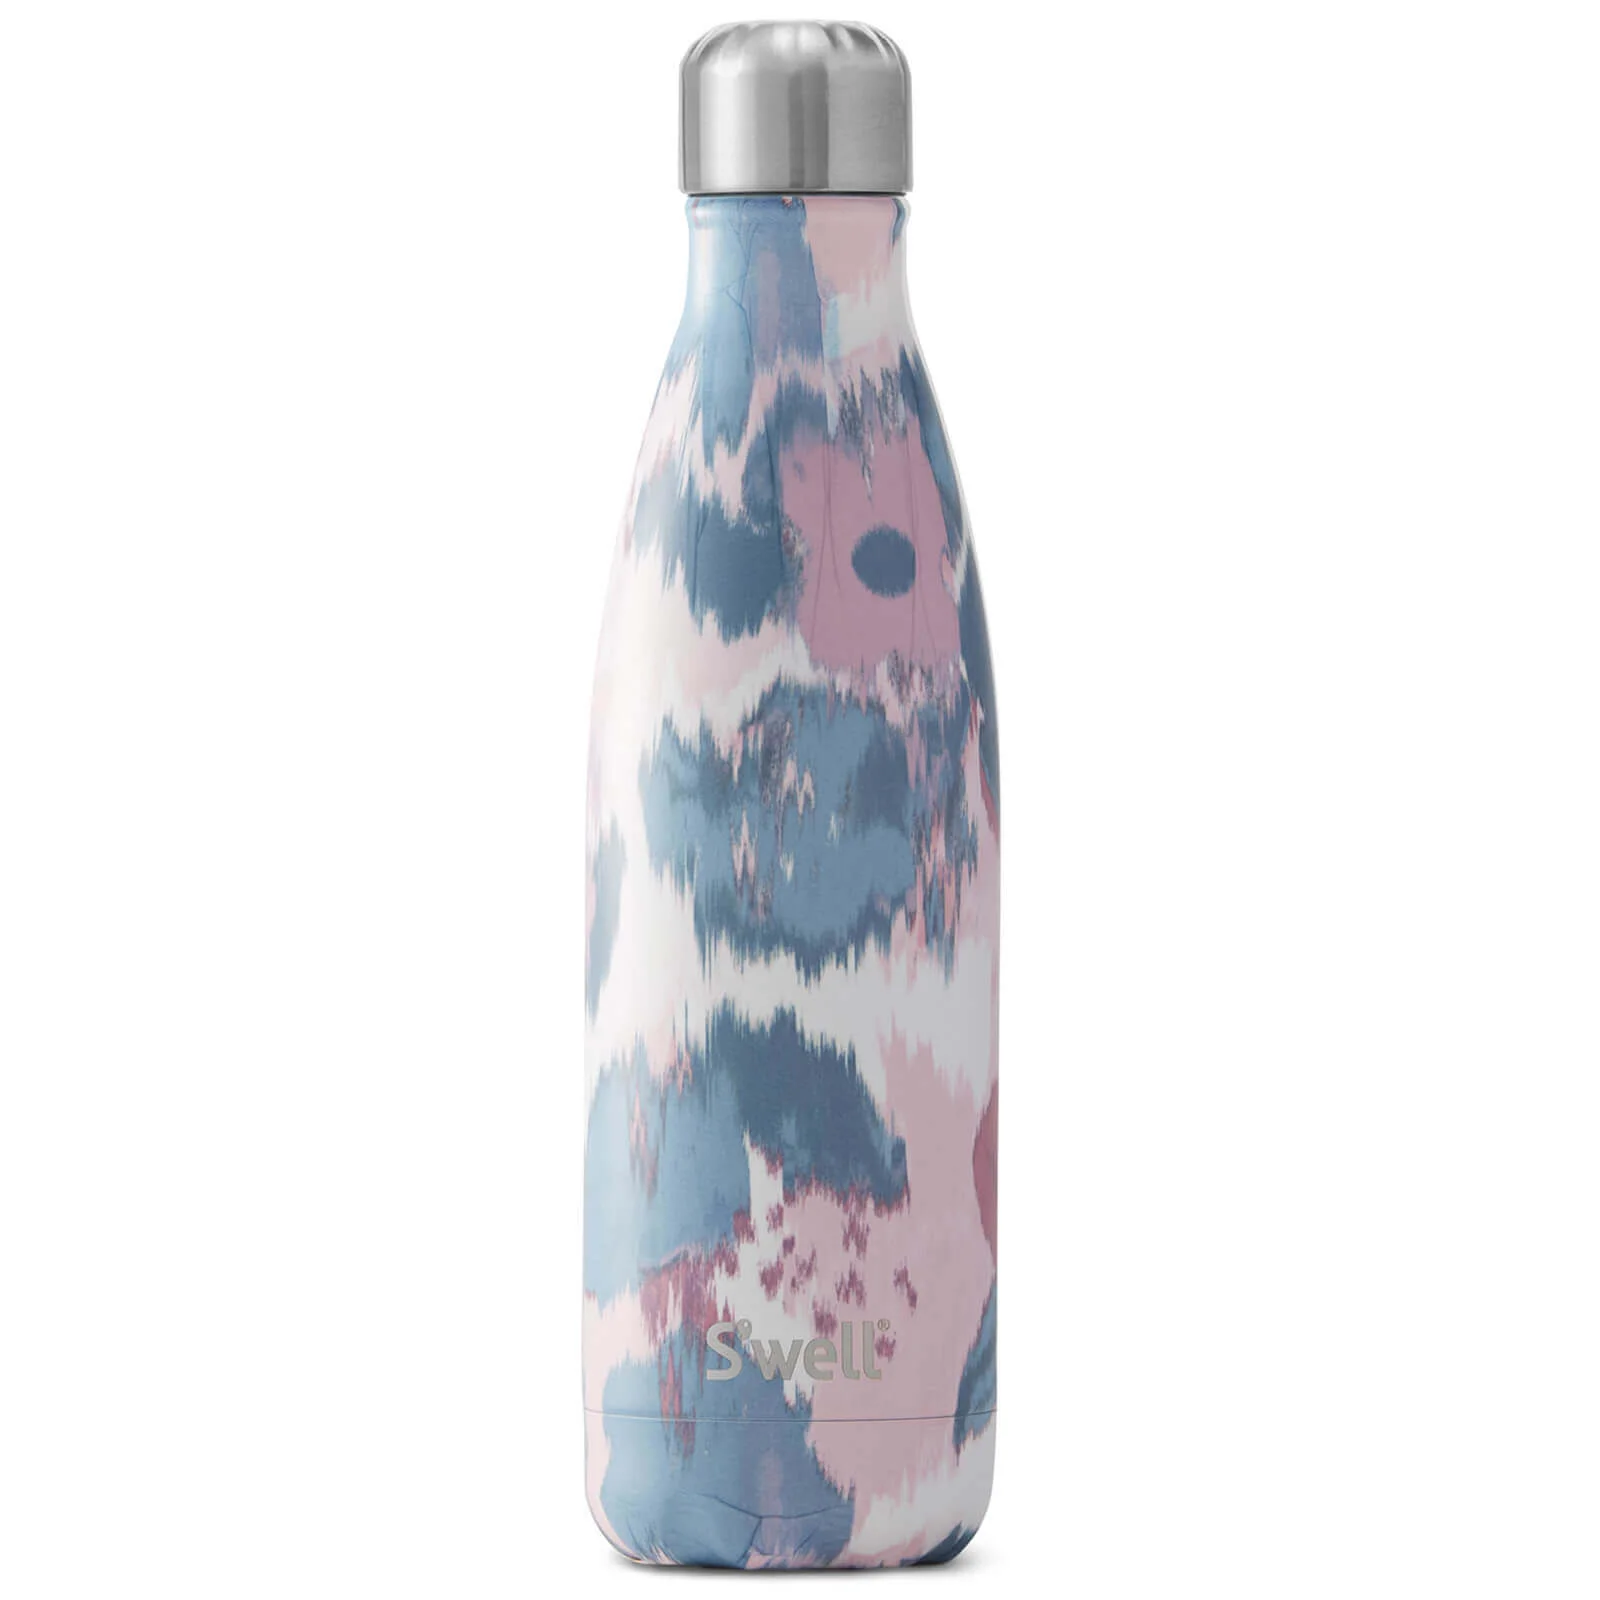 S'well Watercolor Lilies Water Bottle 500ml Image 1